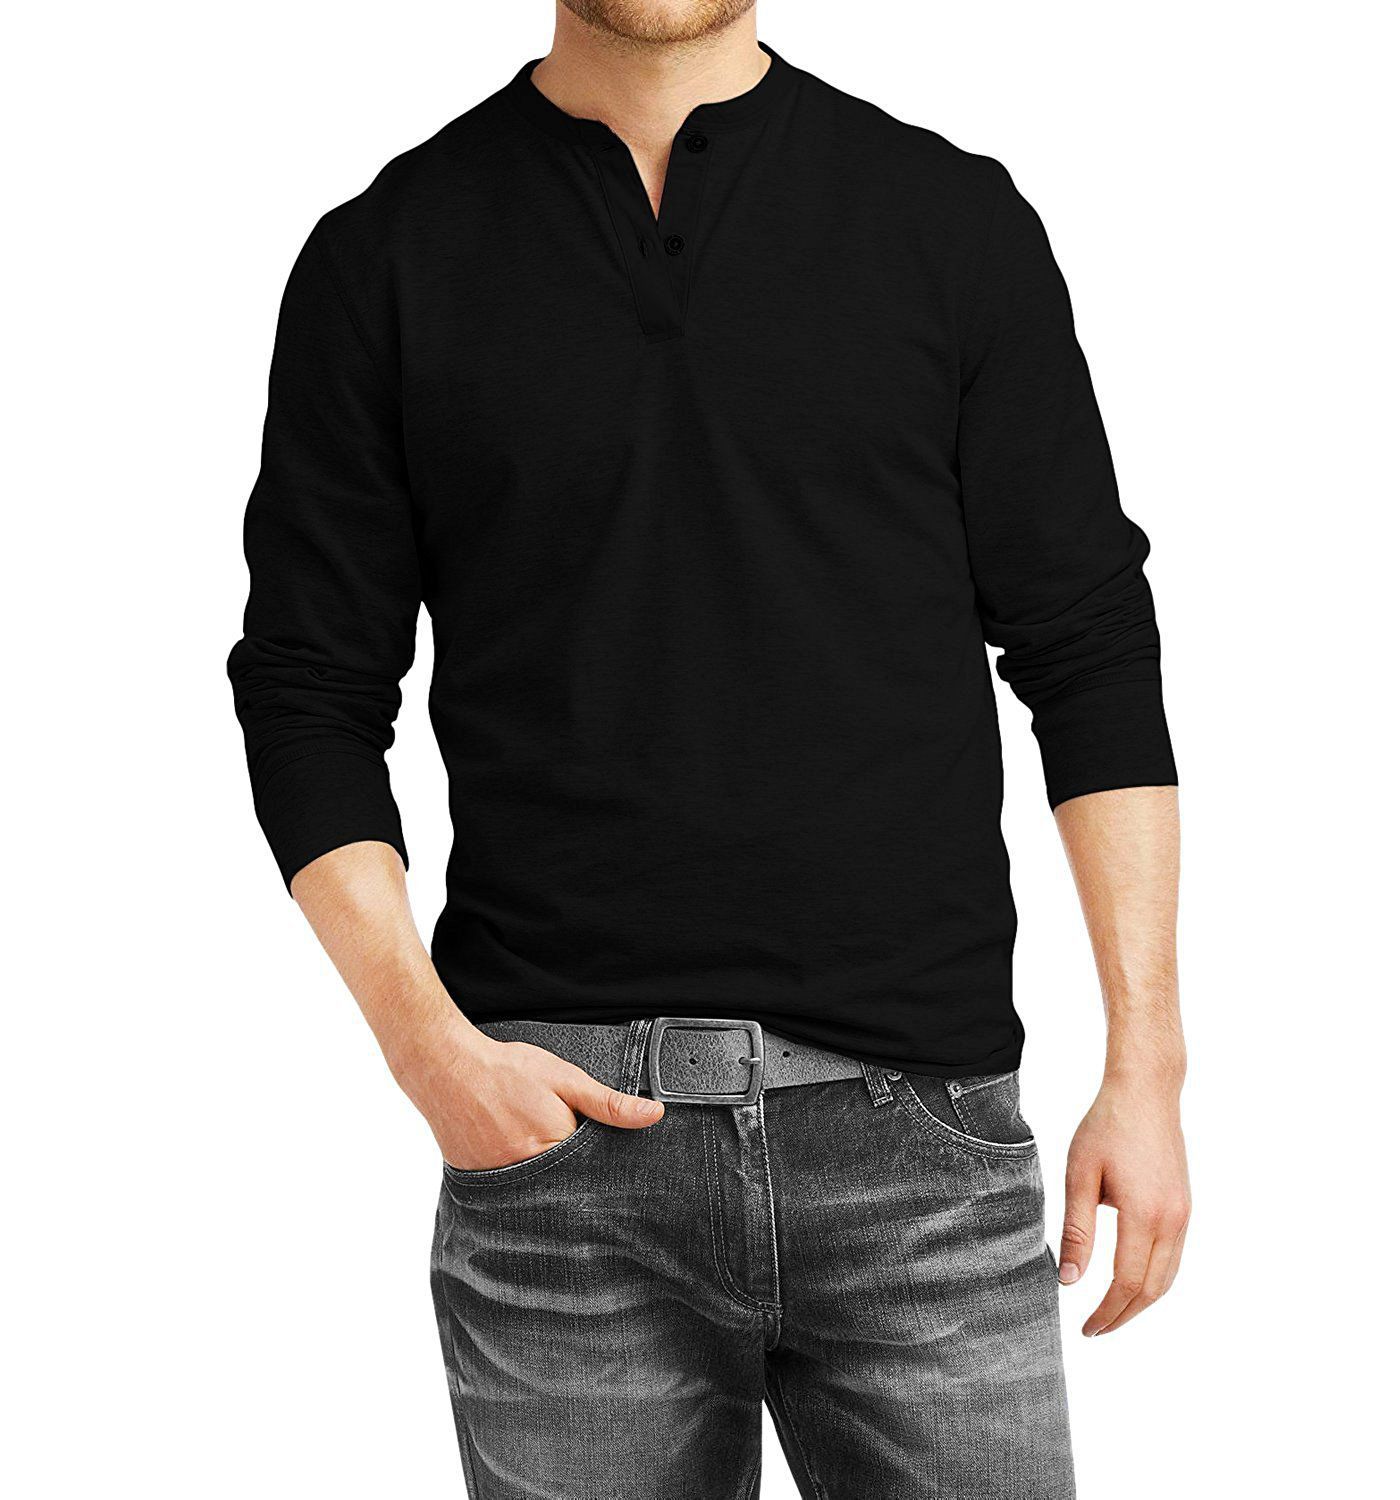 Snapdeal- Get upto 50% off on Men’s T-shirts & Polo